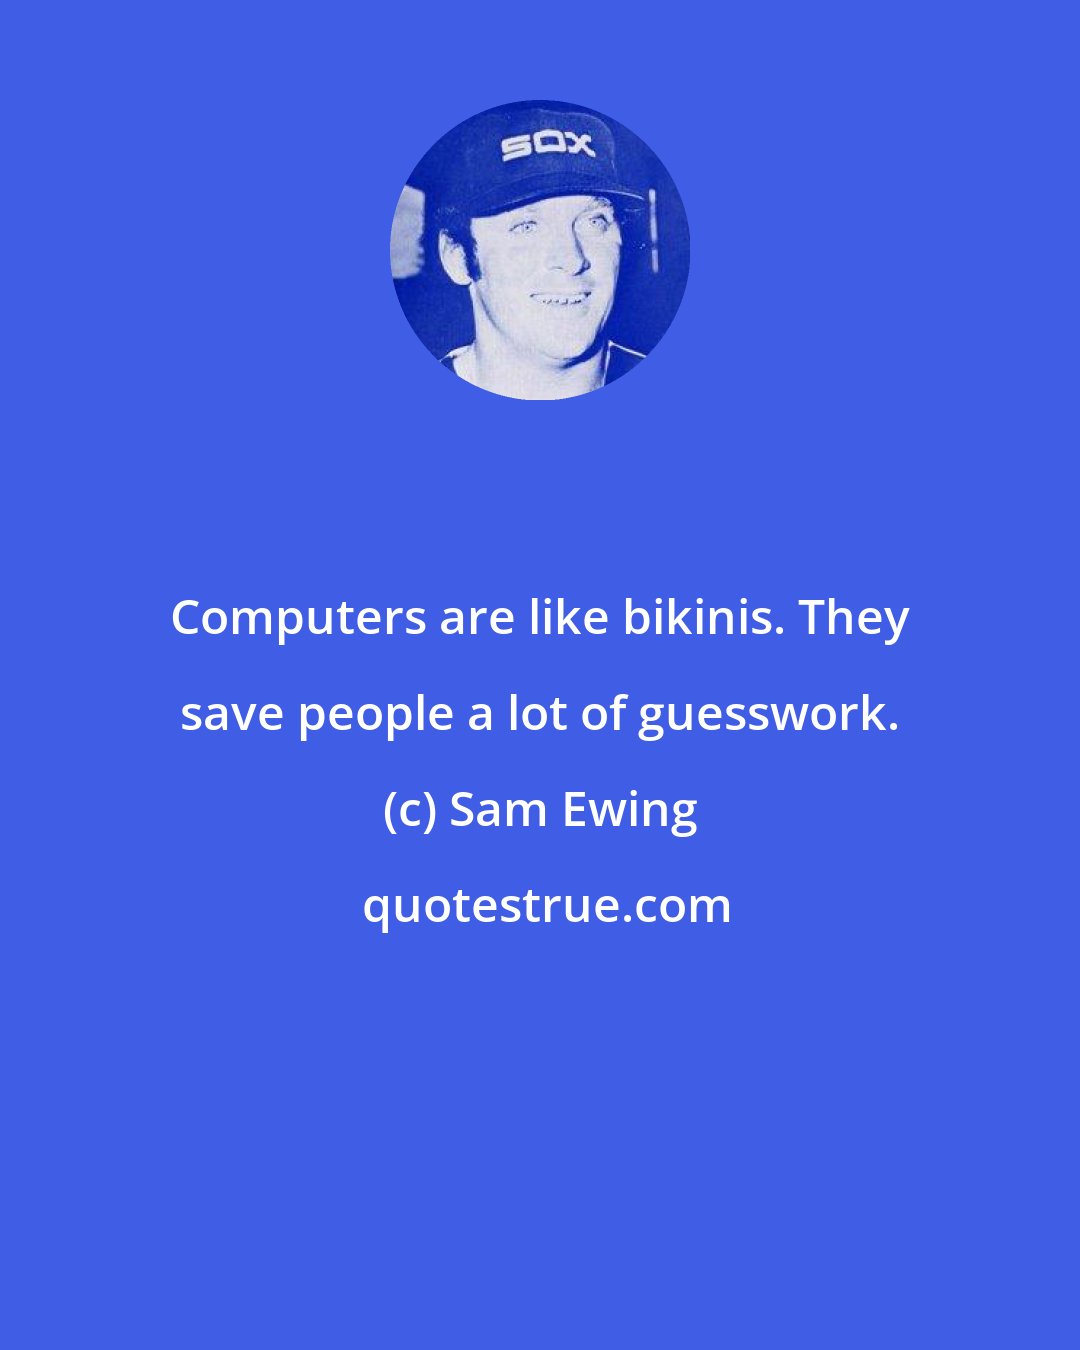 Sam Ewing: Computers are like bikinis. They save people a lot of guesswork.